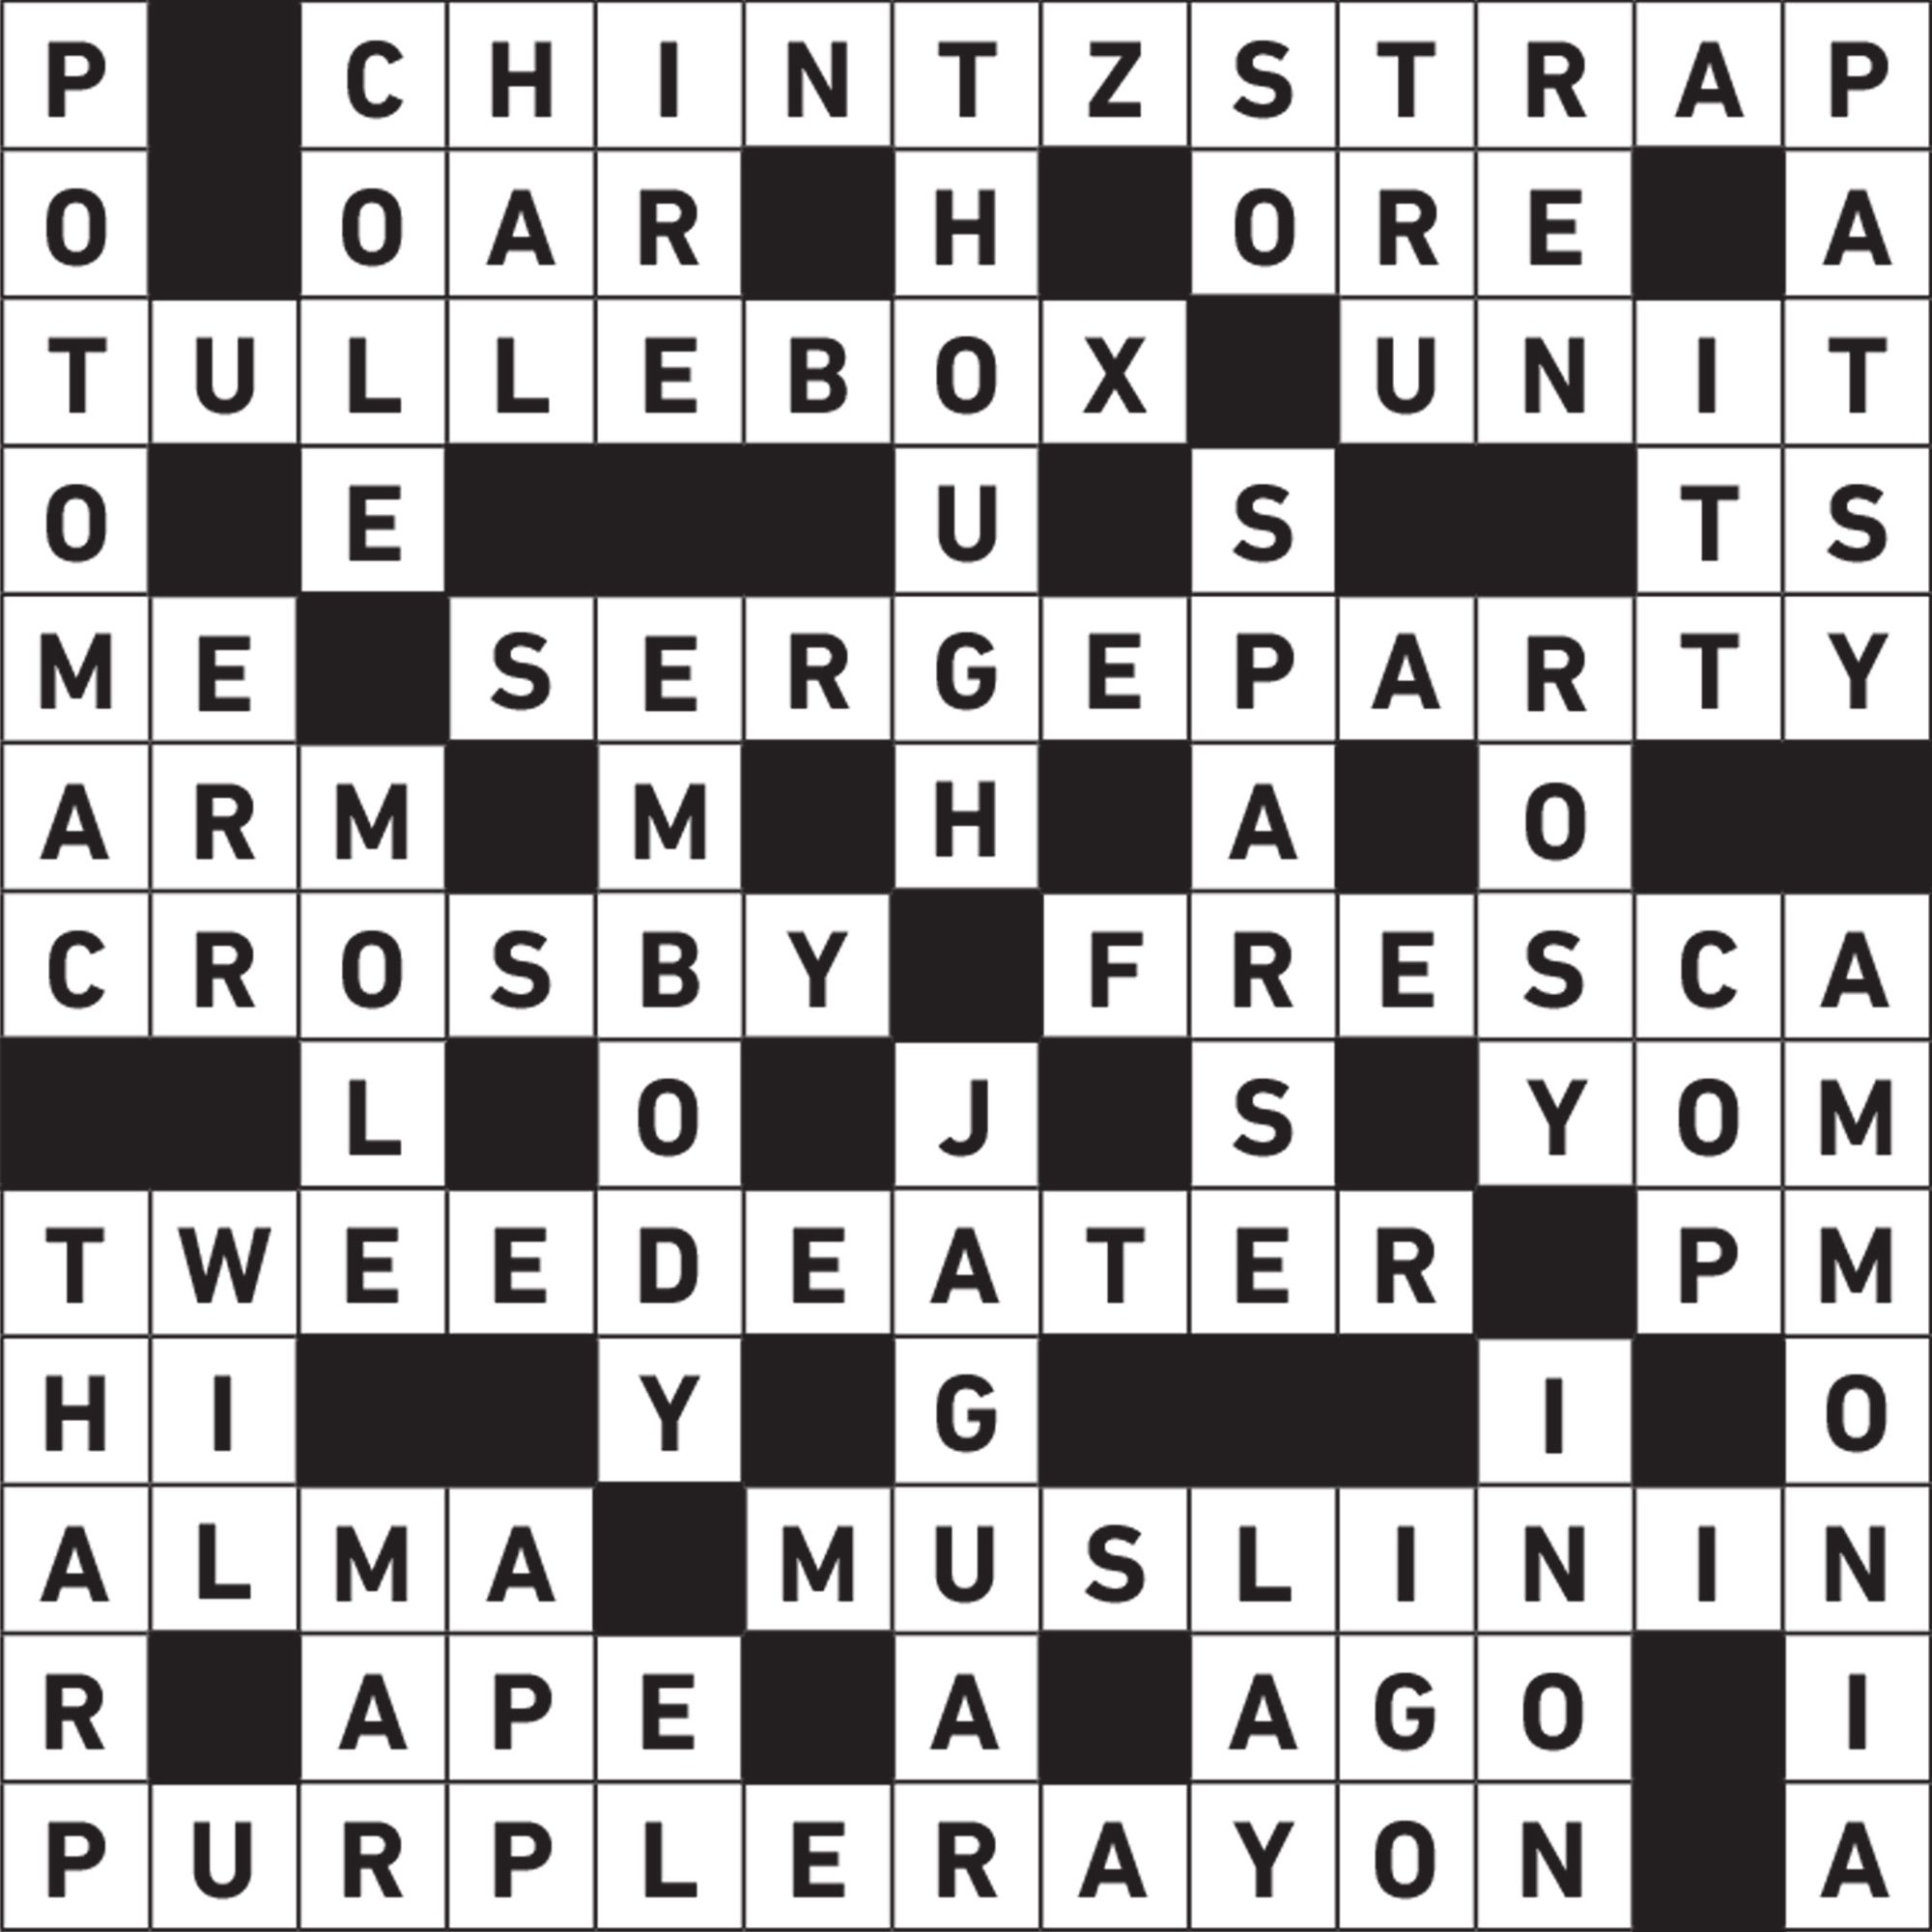 fabric themed crossword puzzle